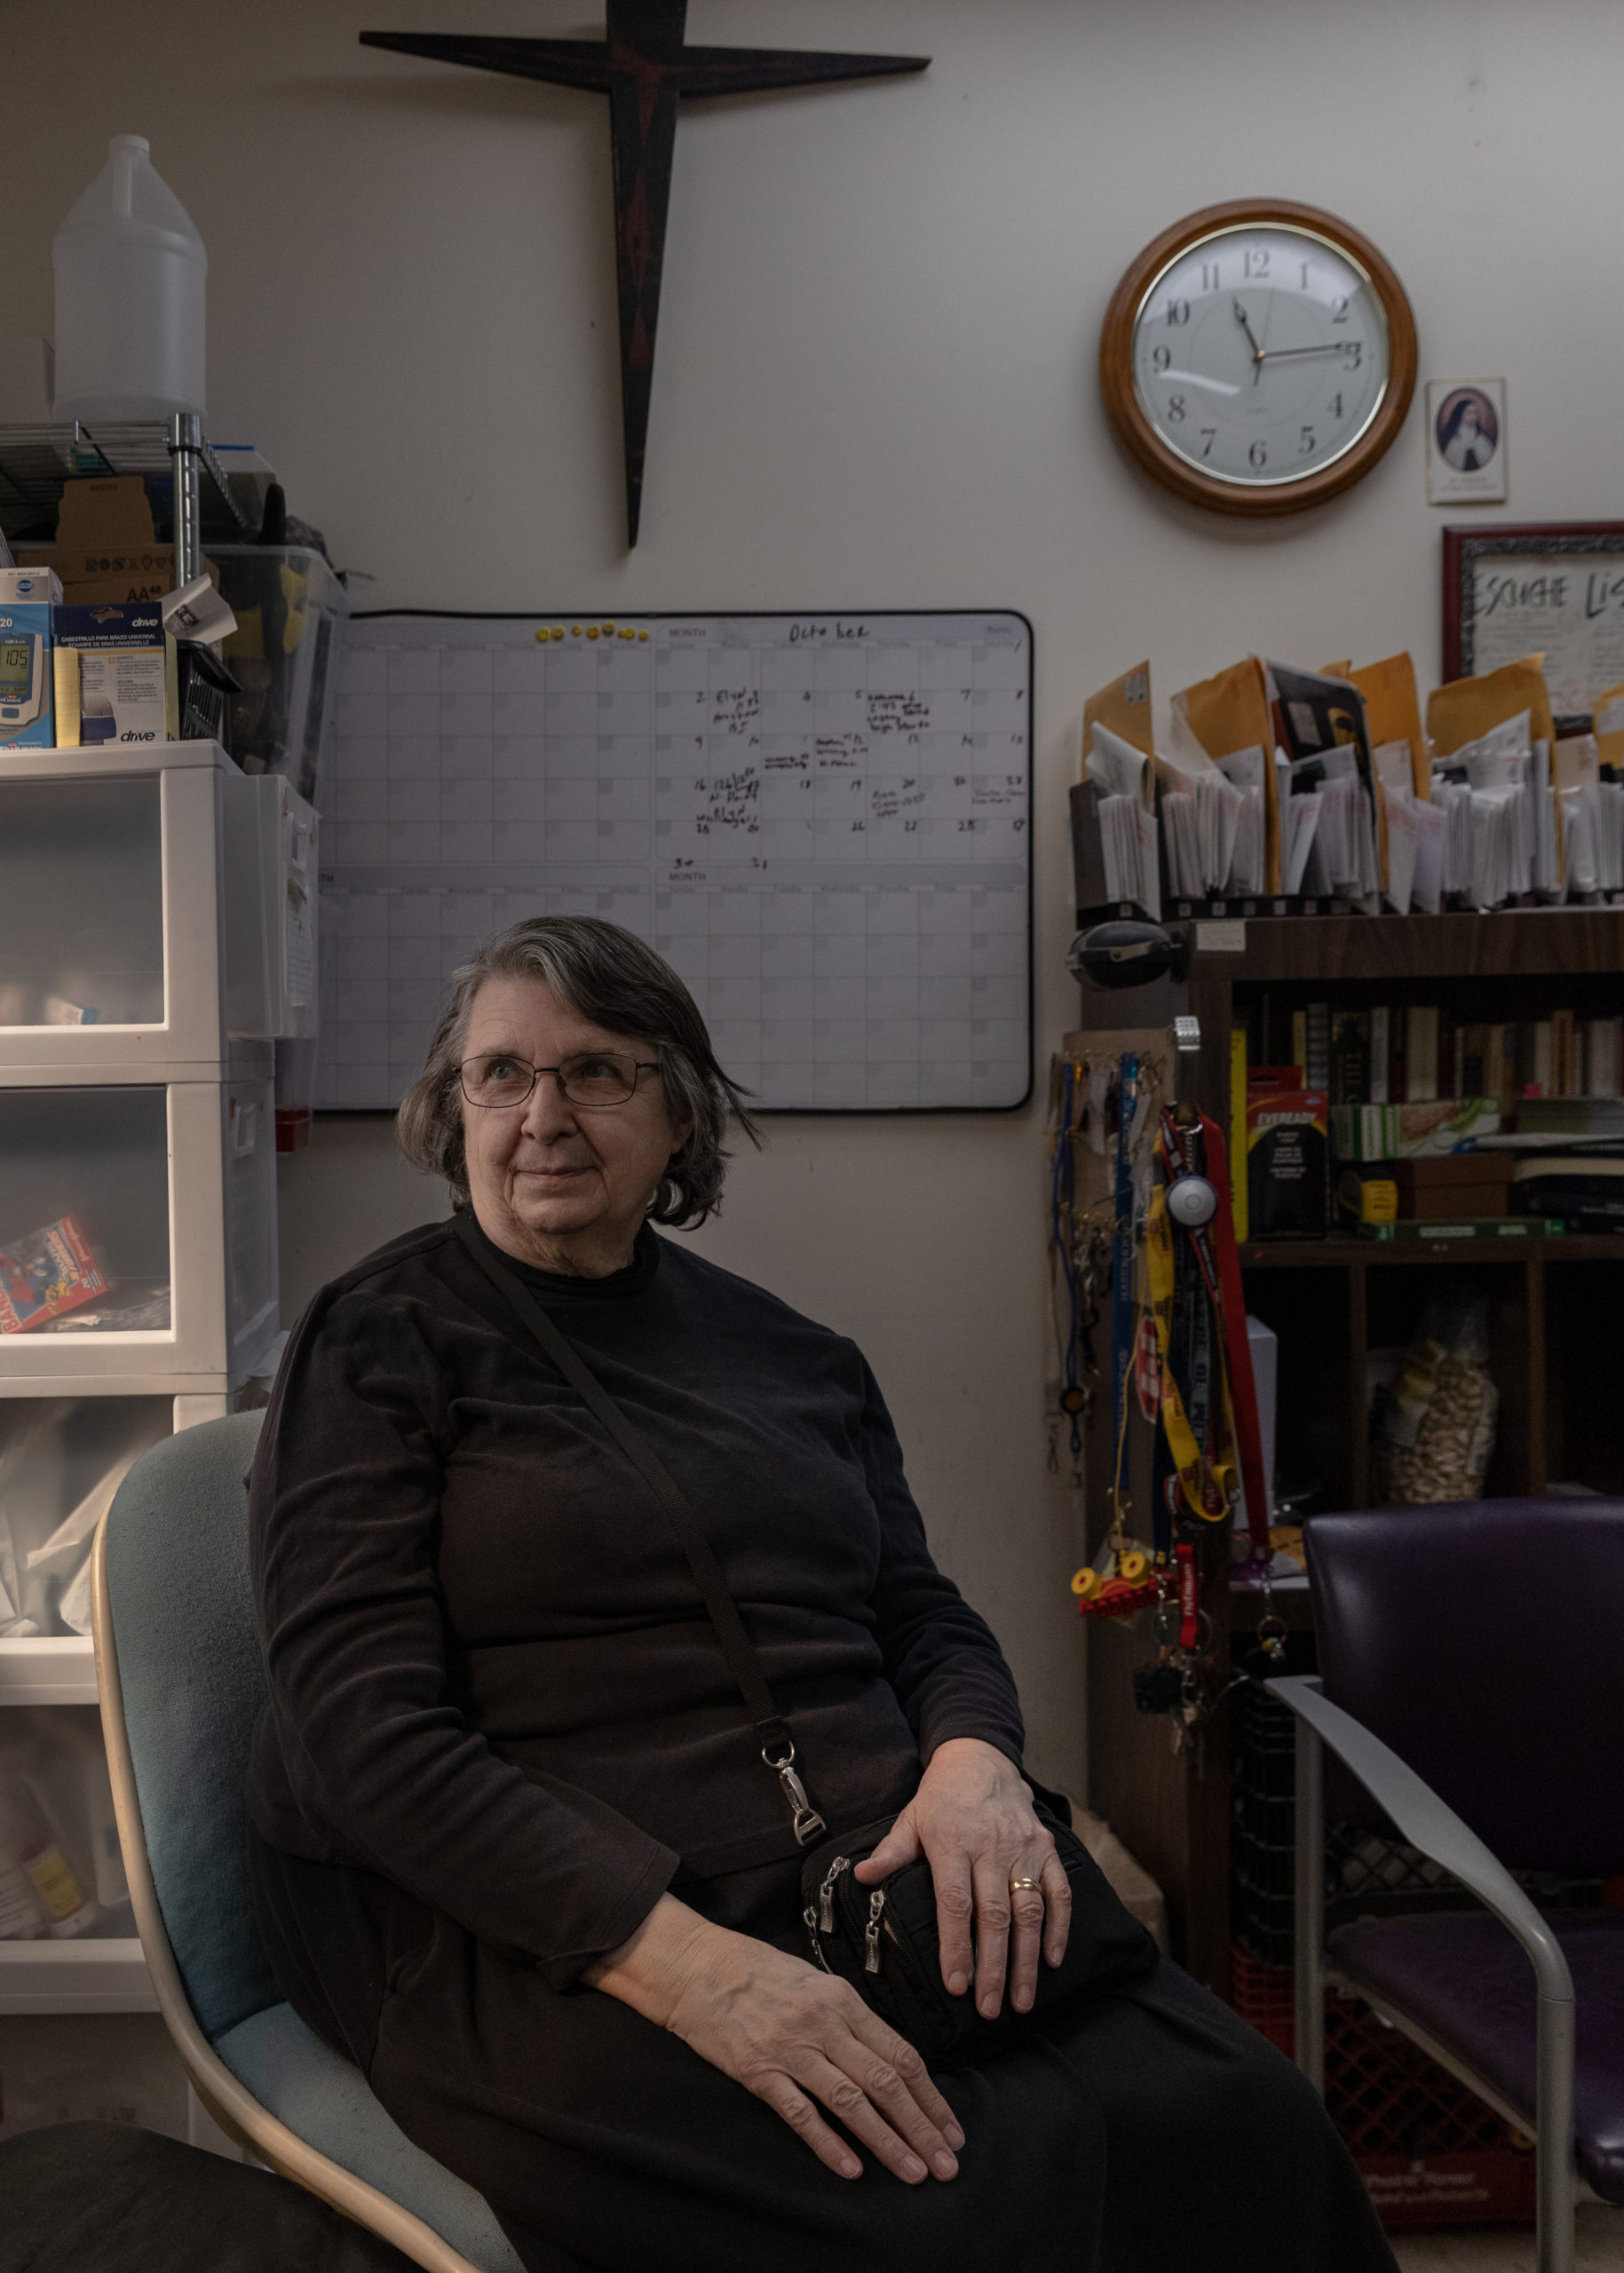 An older woman in dark clothes sits in an office chair among office supplies, a clock, and a prominent but rustic looking wooden cross on the wall.